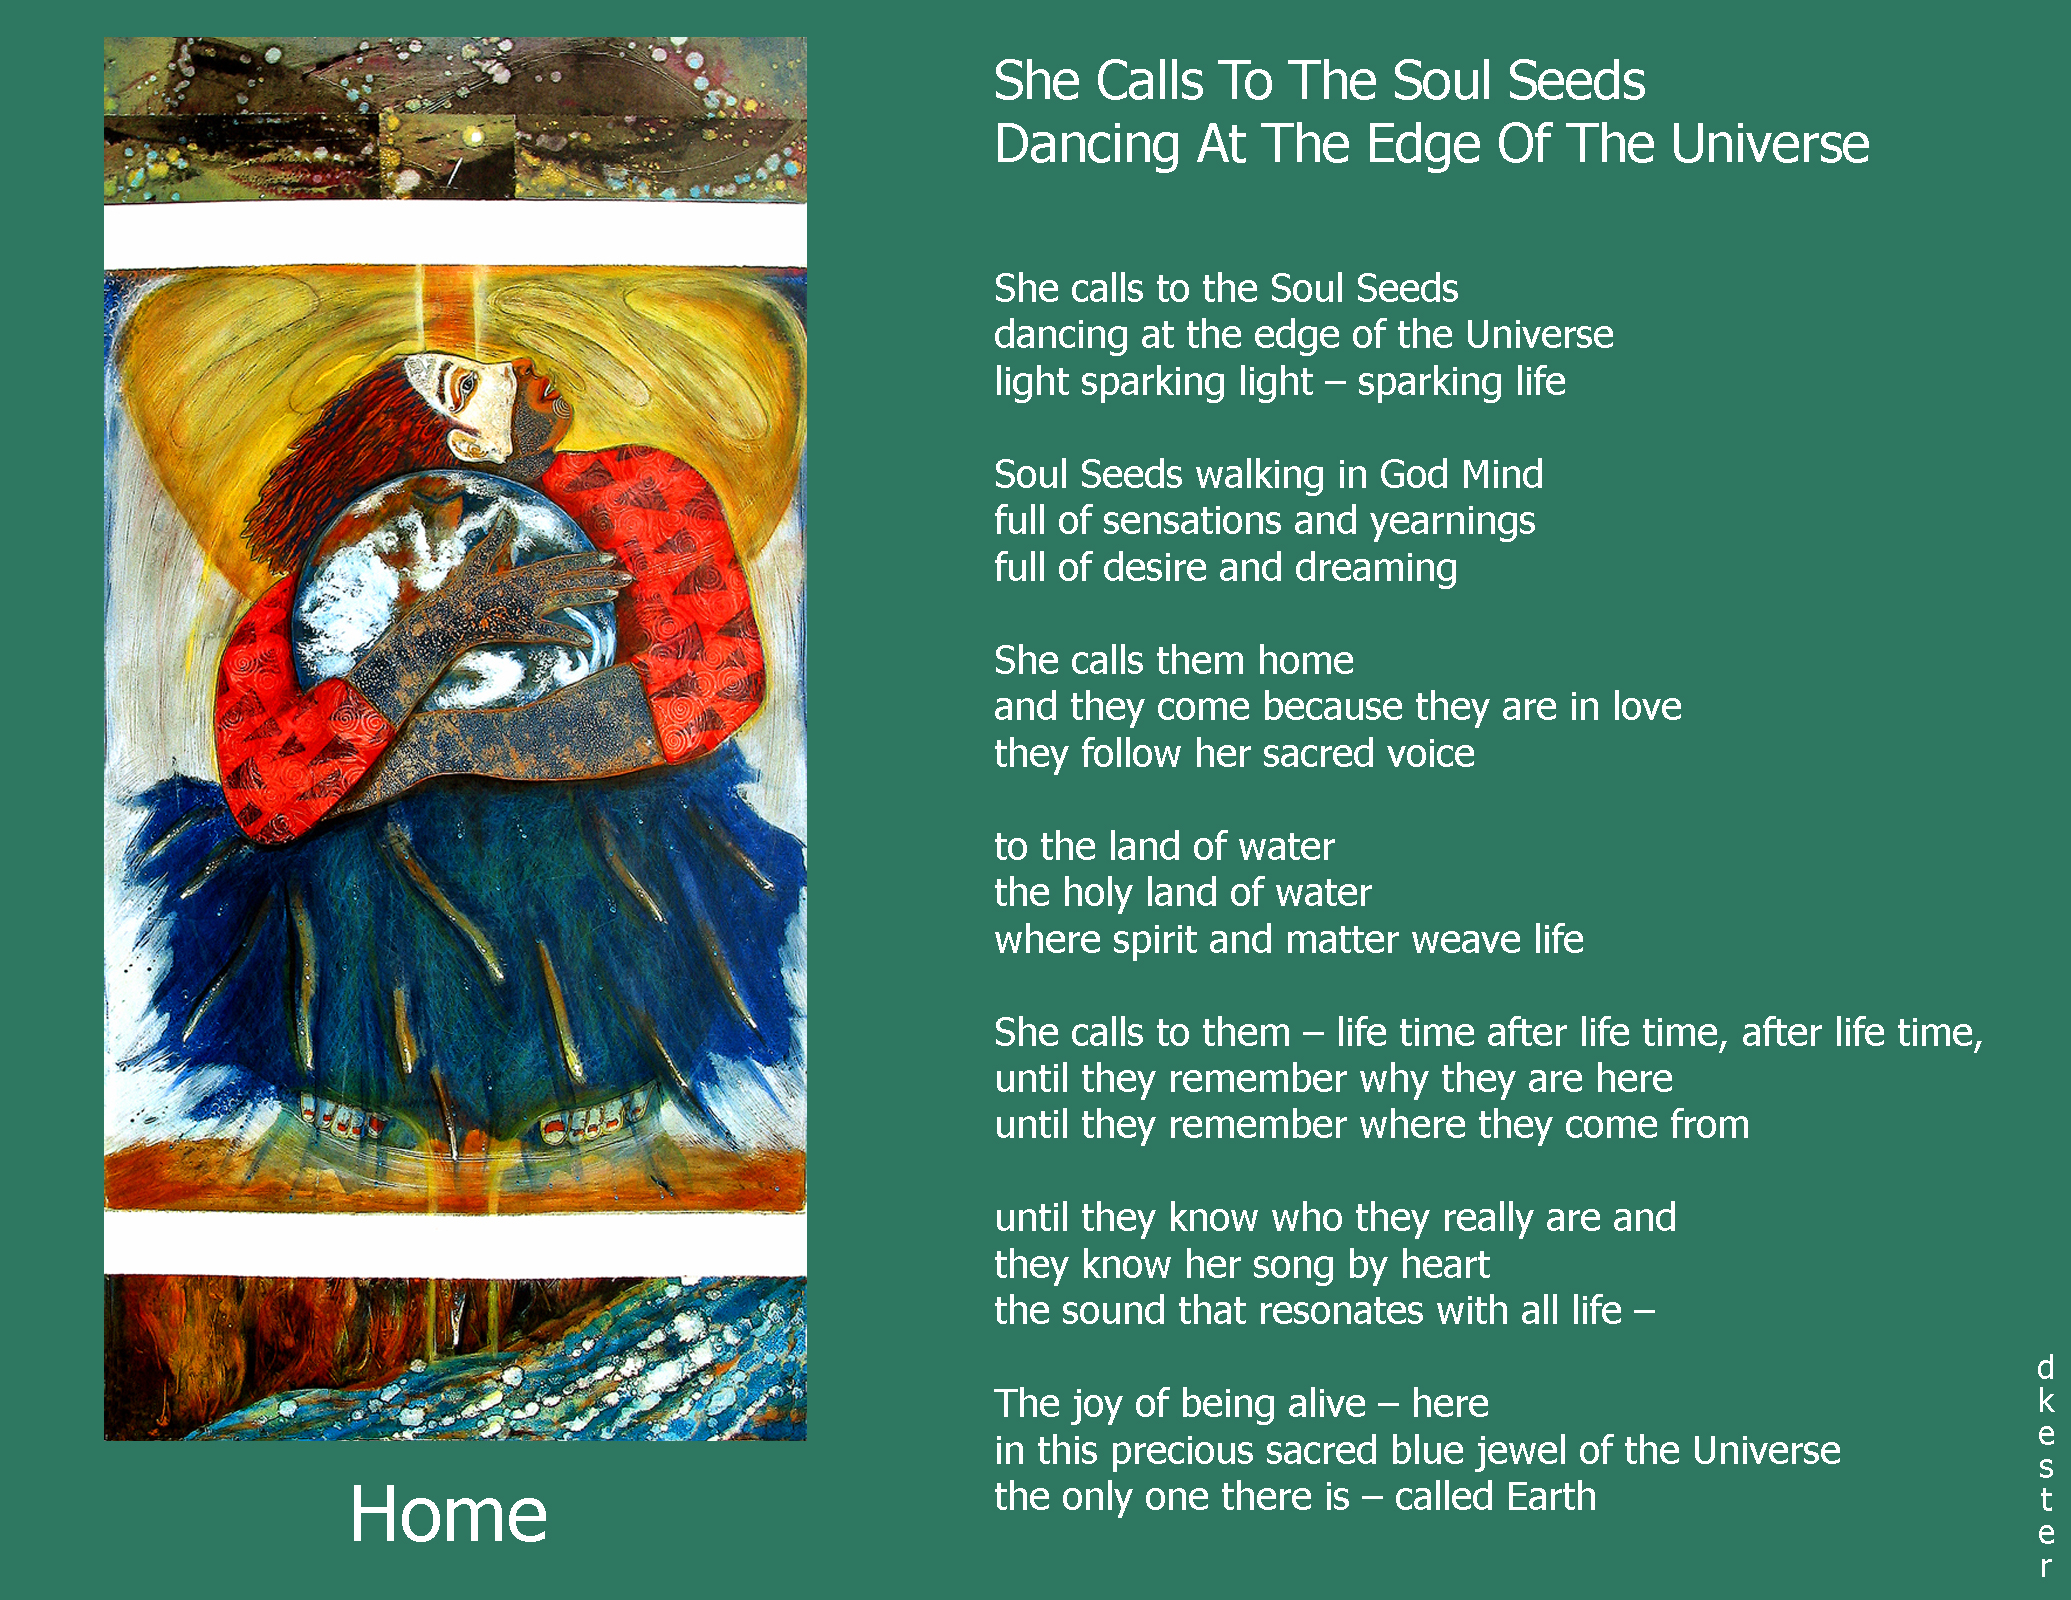 Denise Kester: She calls to the soul seeds